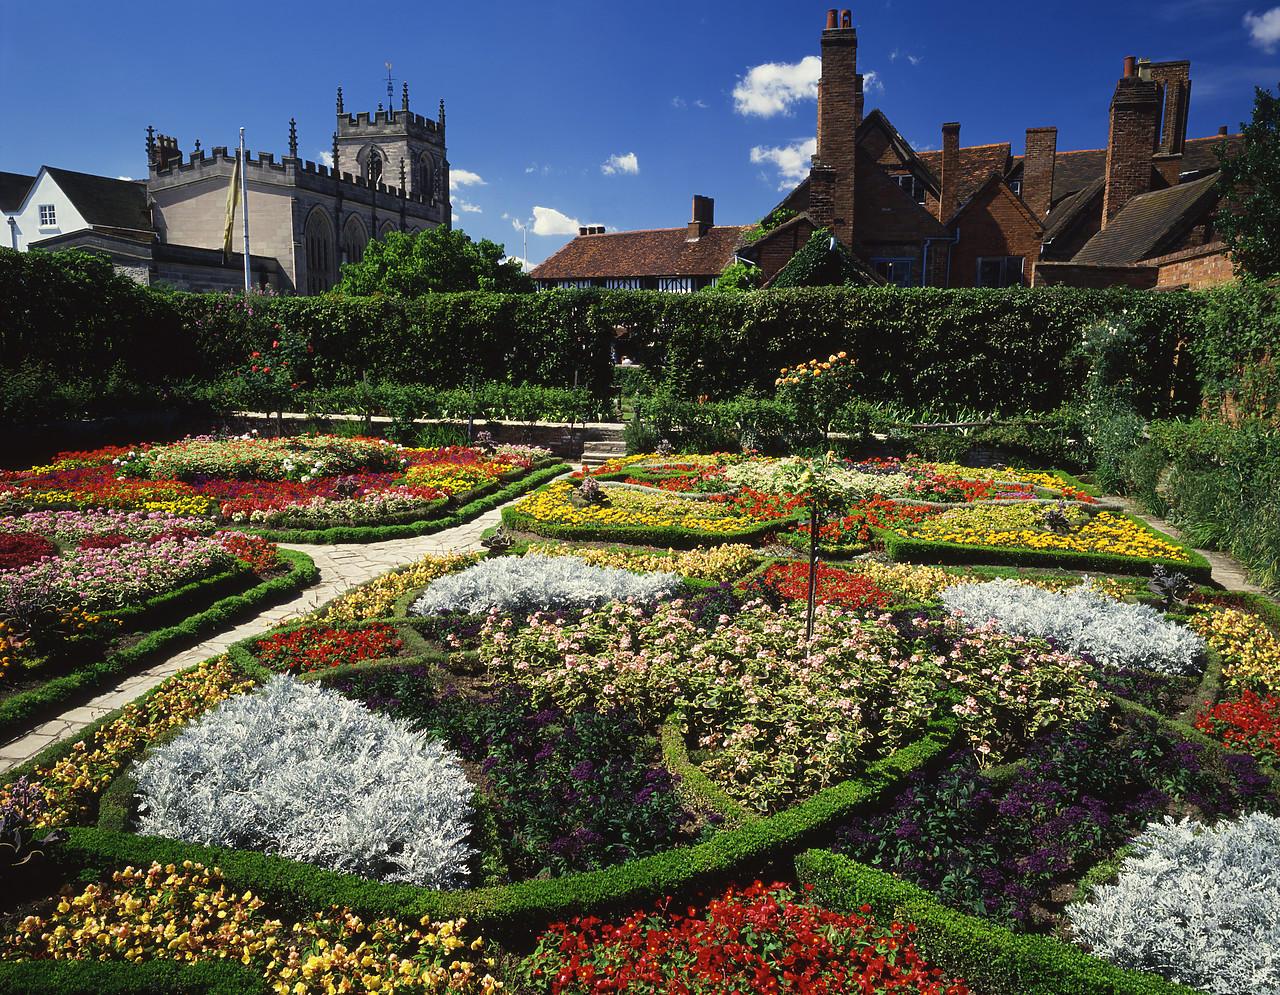 #871013-1 - The Knot Garden at New Place, Stratford-upon-Avon, Warwickshire, England